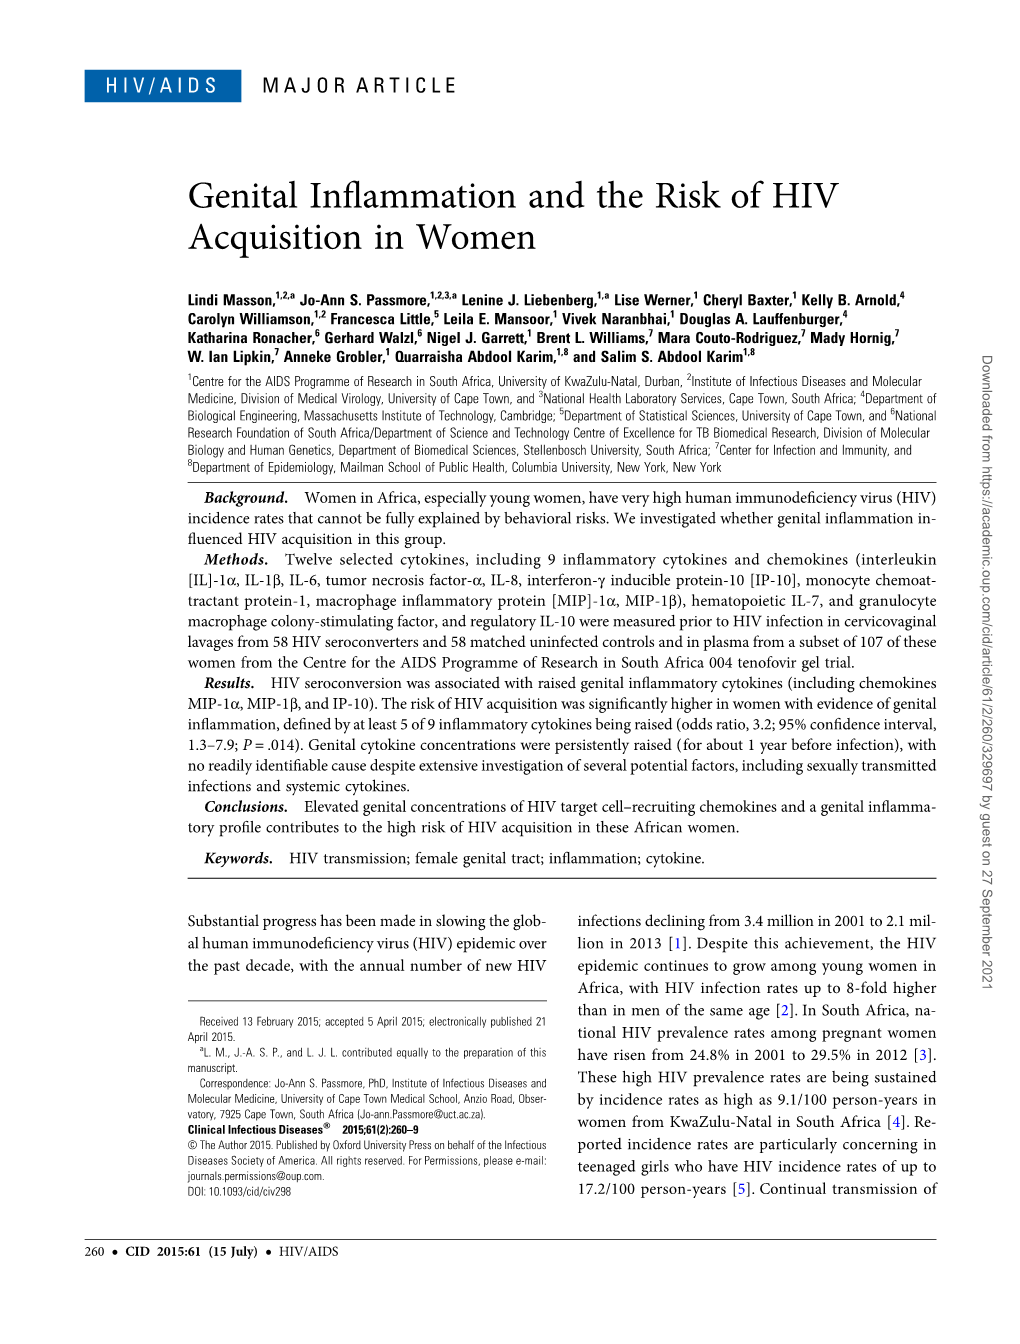 Genital Inflammation and the Risk of HIV Acquisition in Women